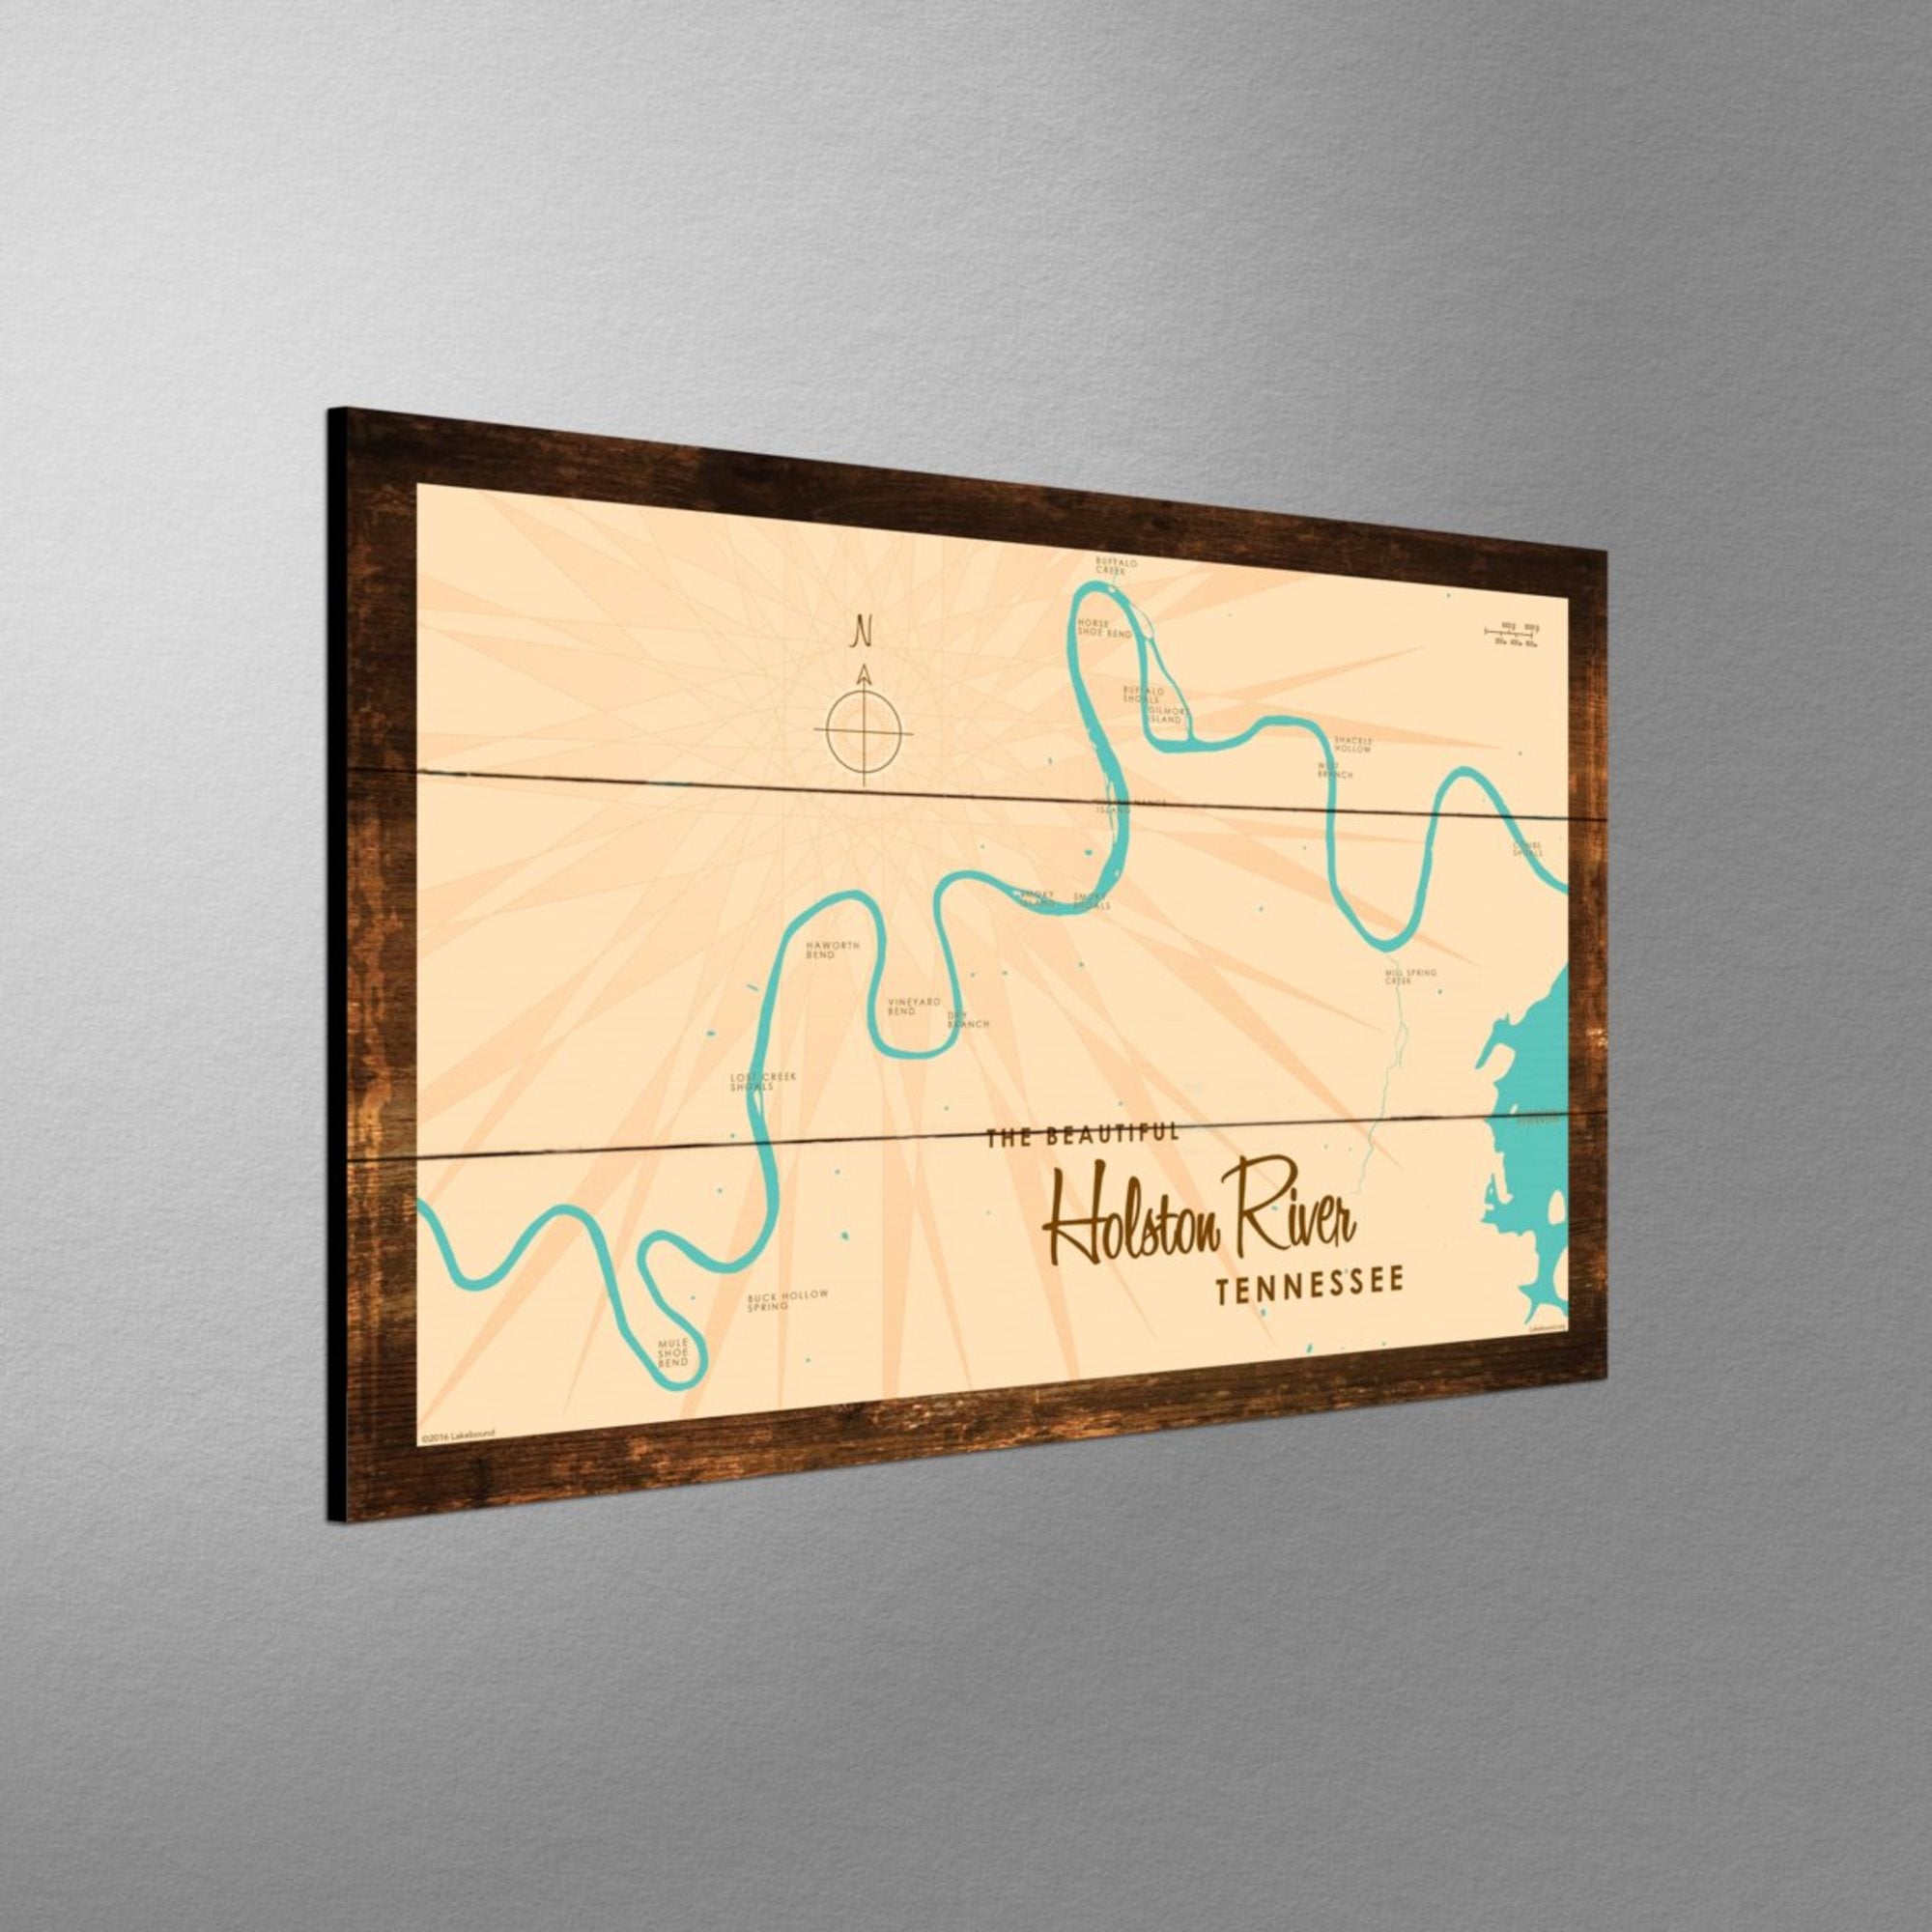 Holston River Tennessee, Rustic Wood Sign Map Art